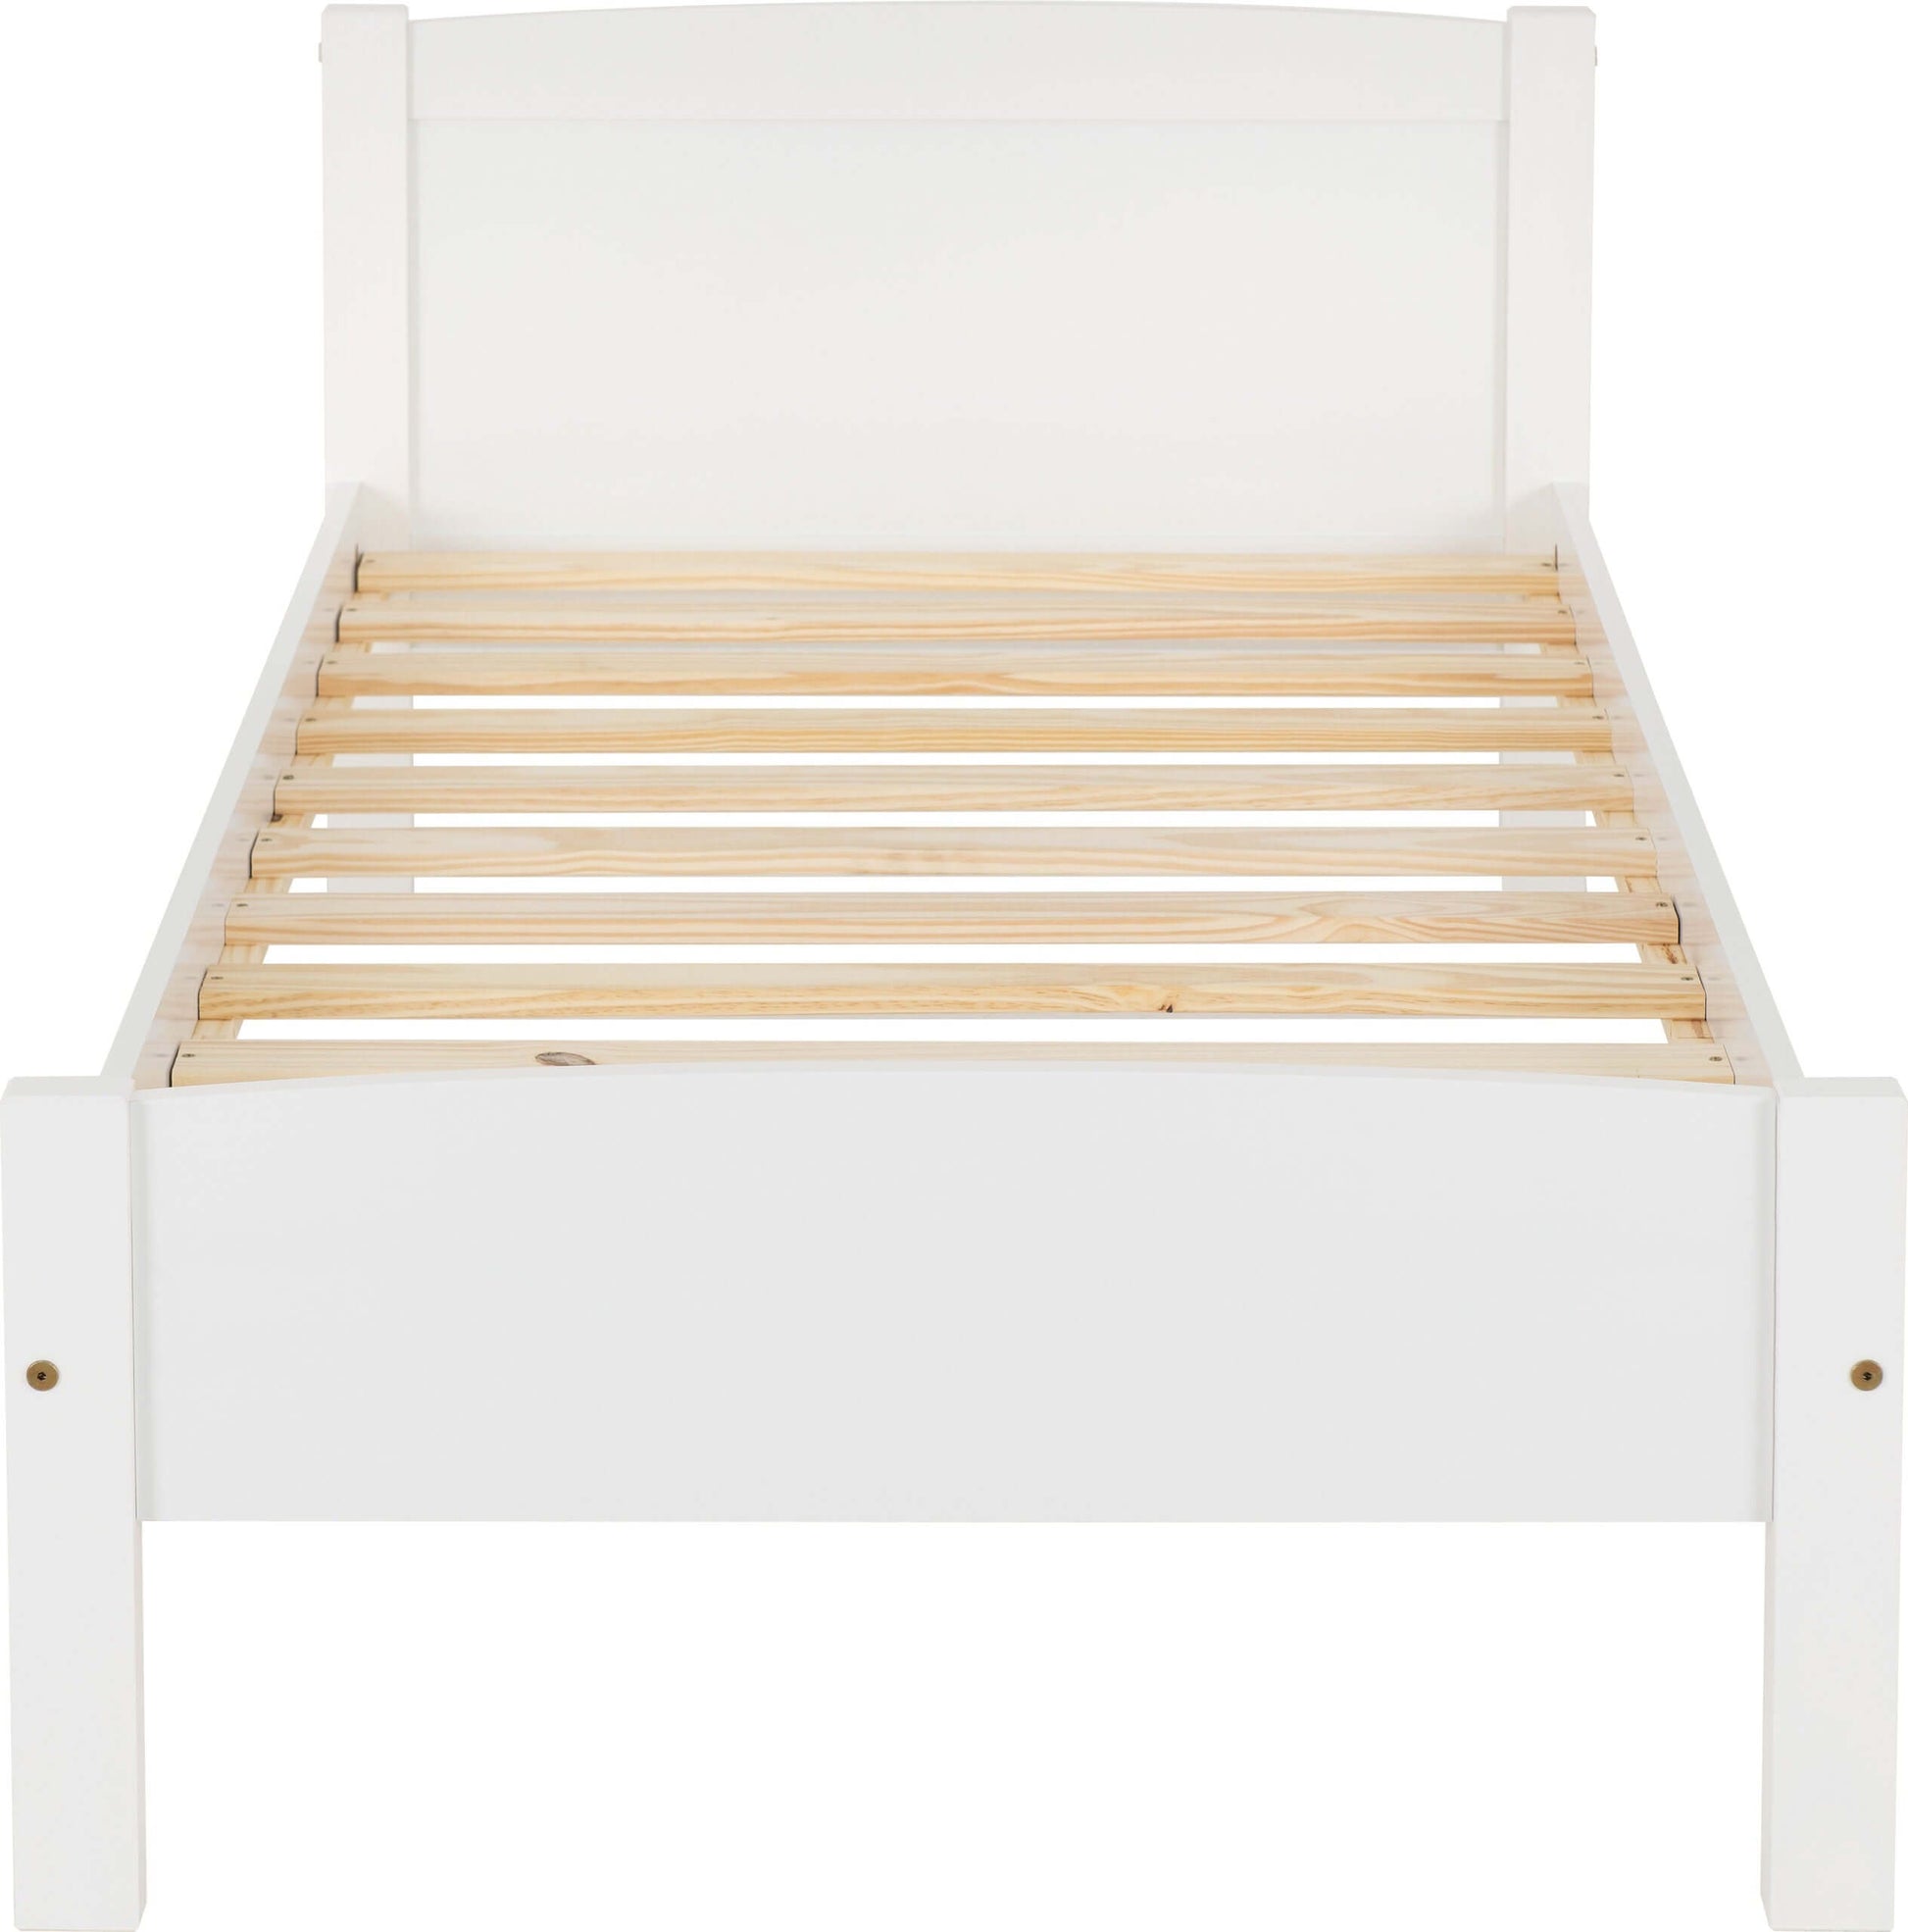 Amber 3' Single Bed White- The Right Buy Store